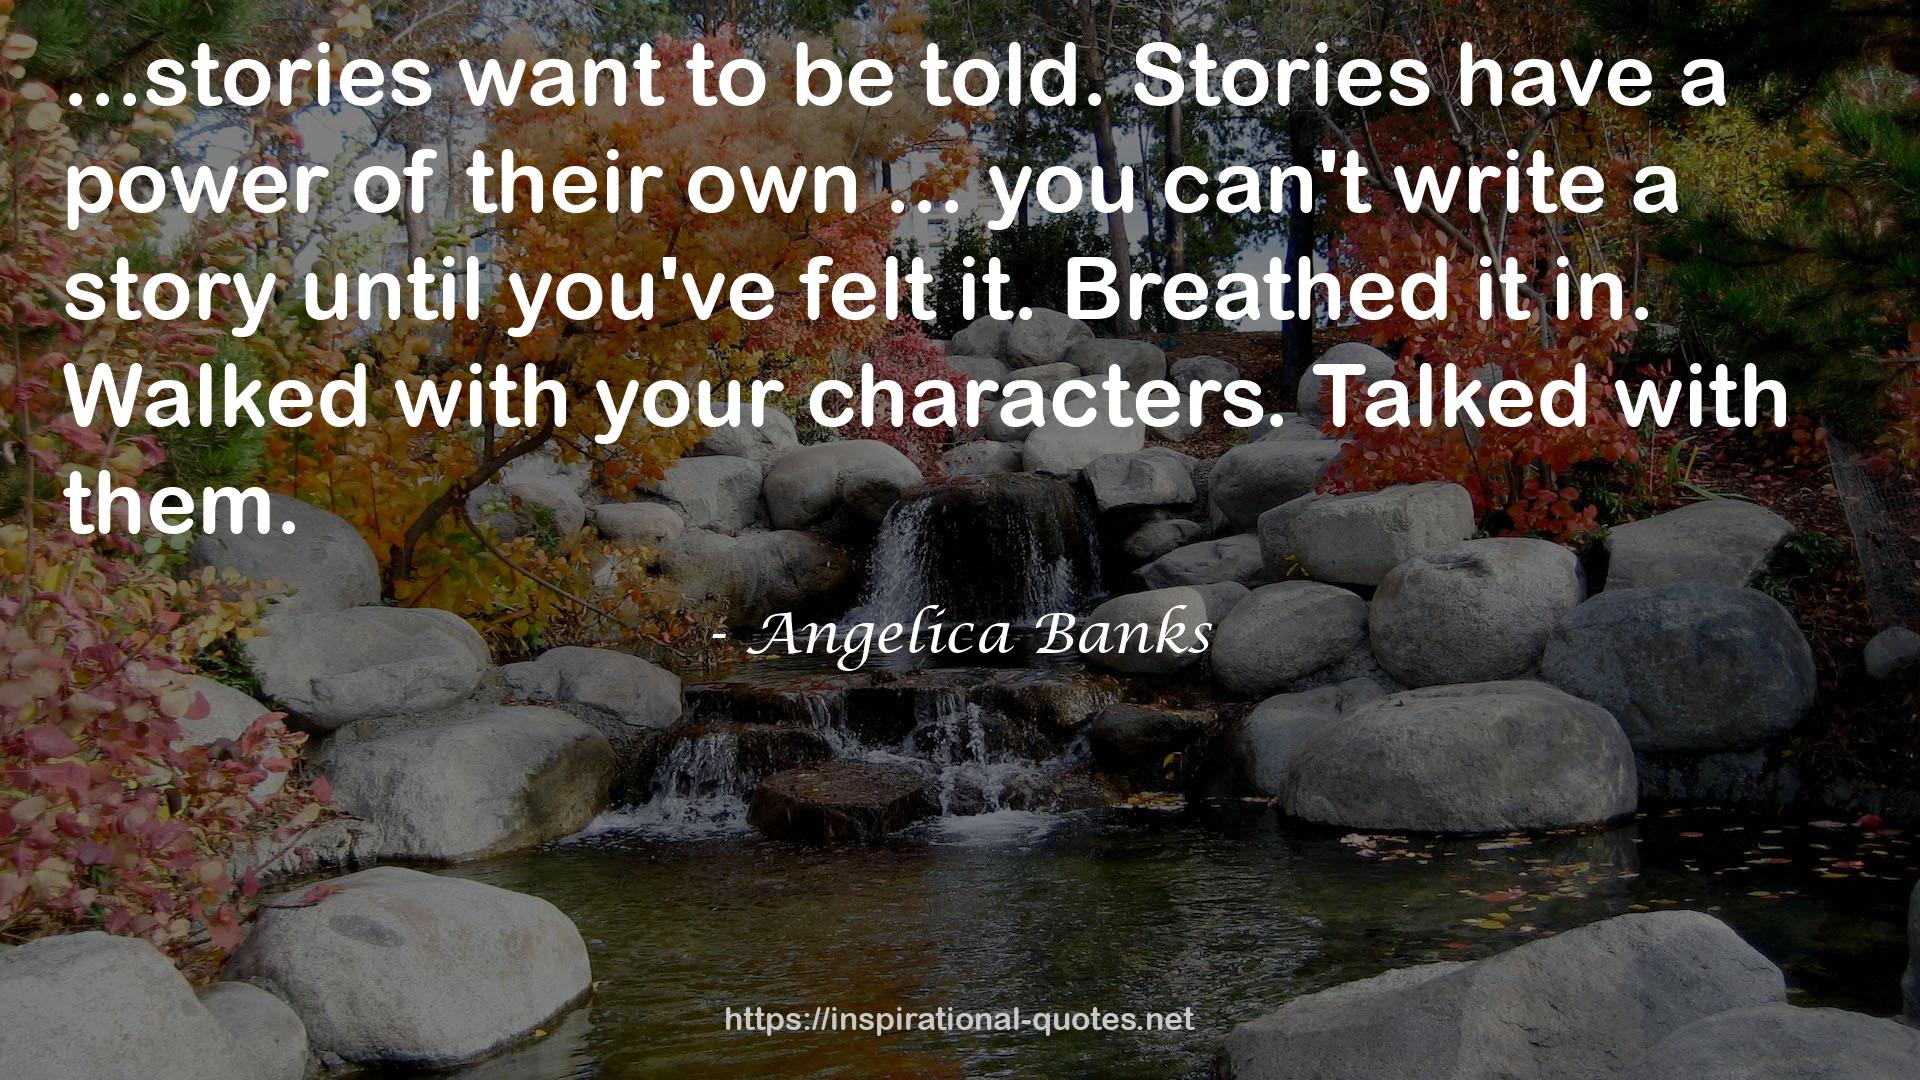 Angelica Banks QUOTES